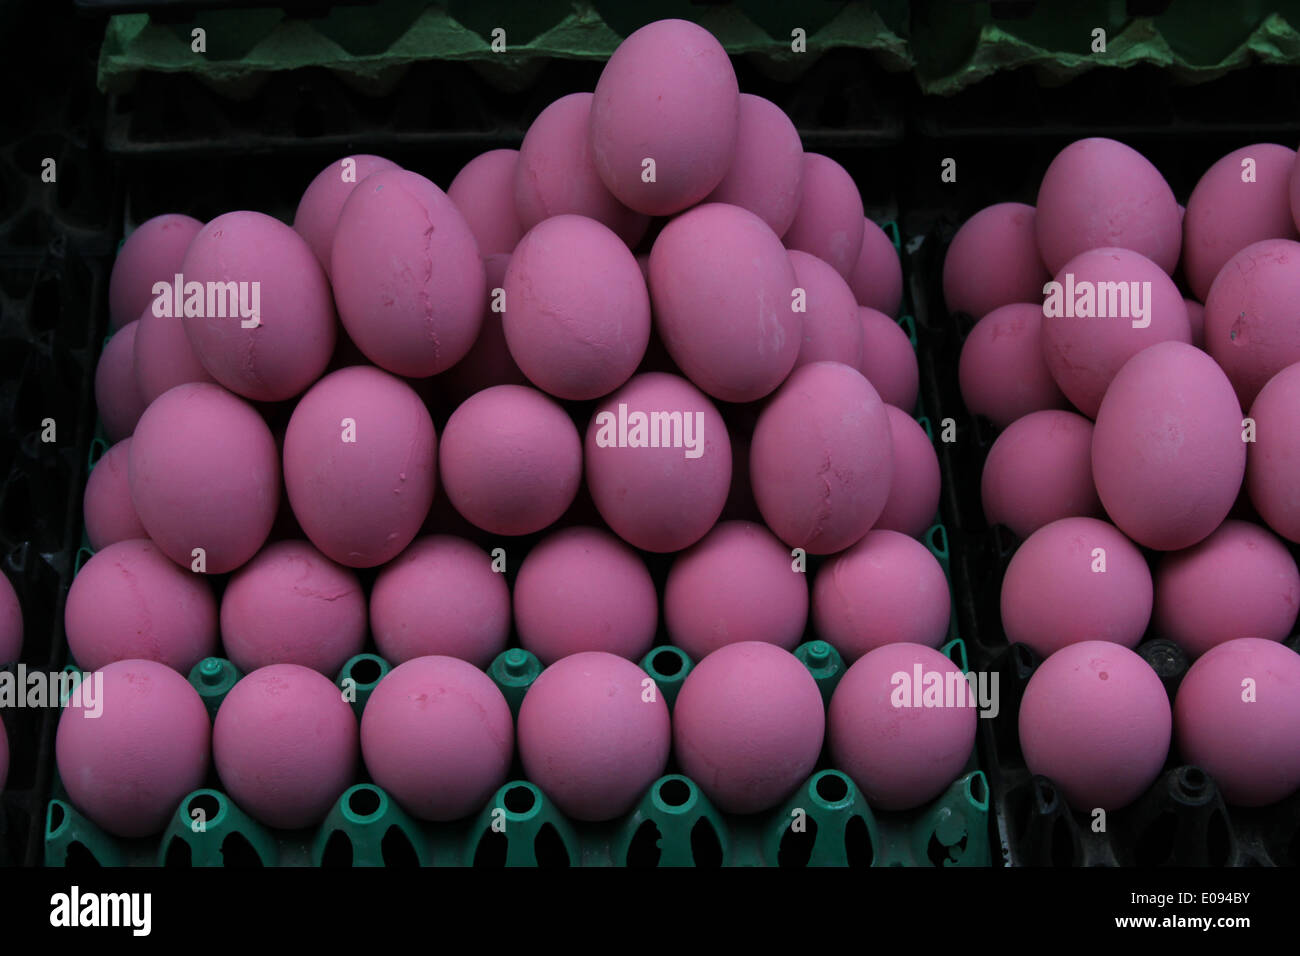 Pink eggs at the market Stock Photo